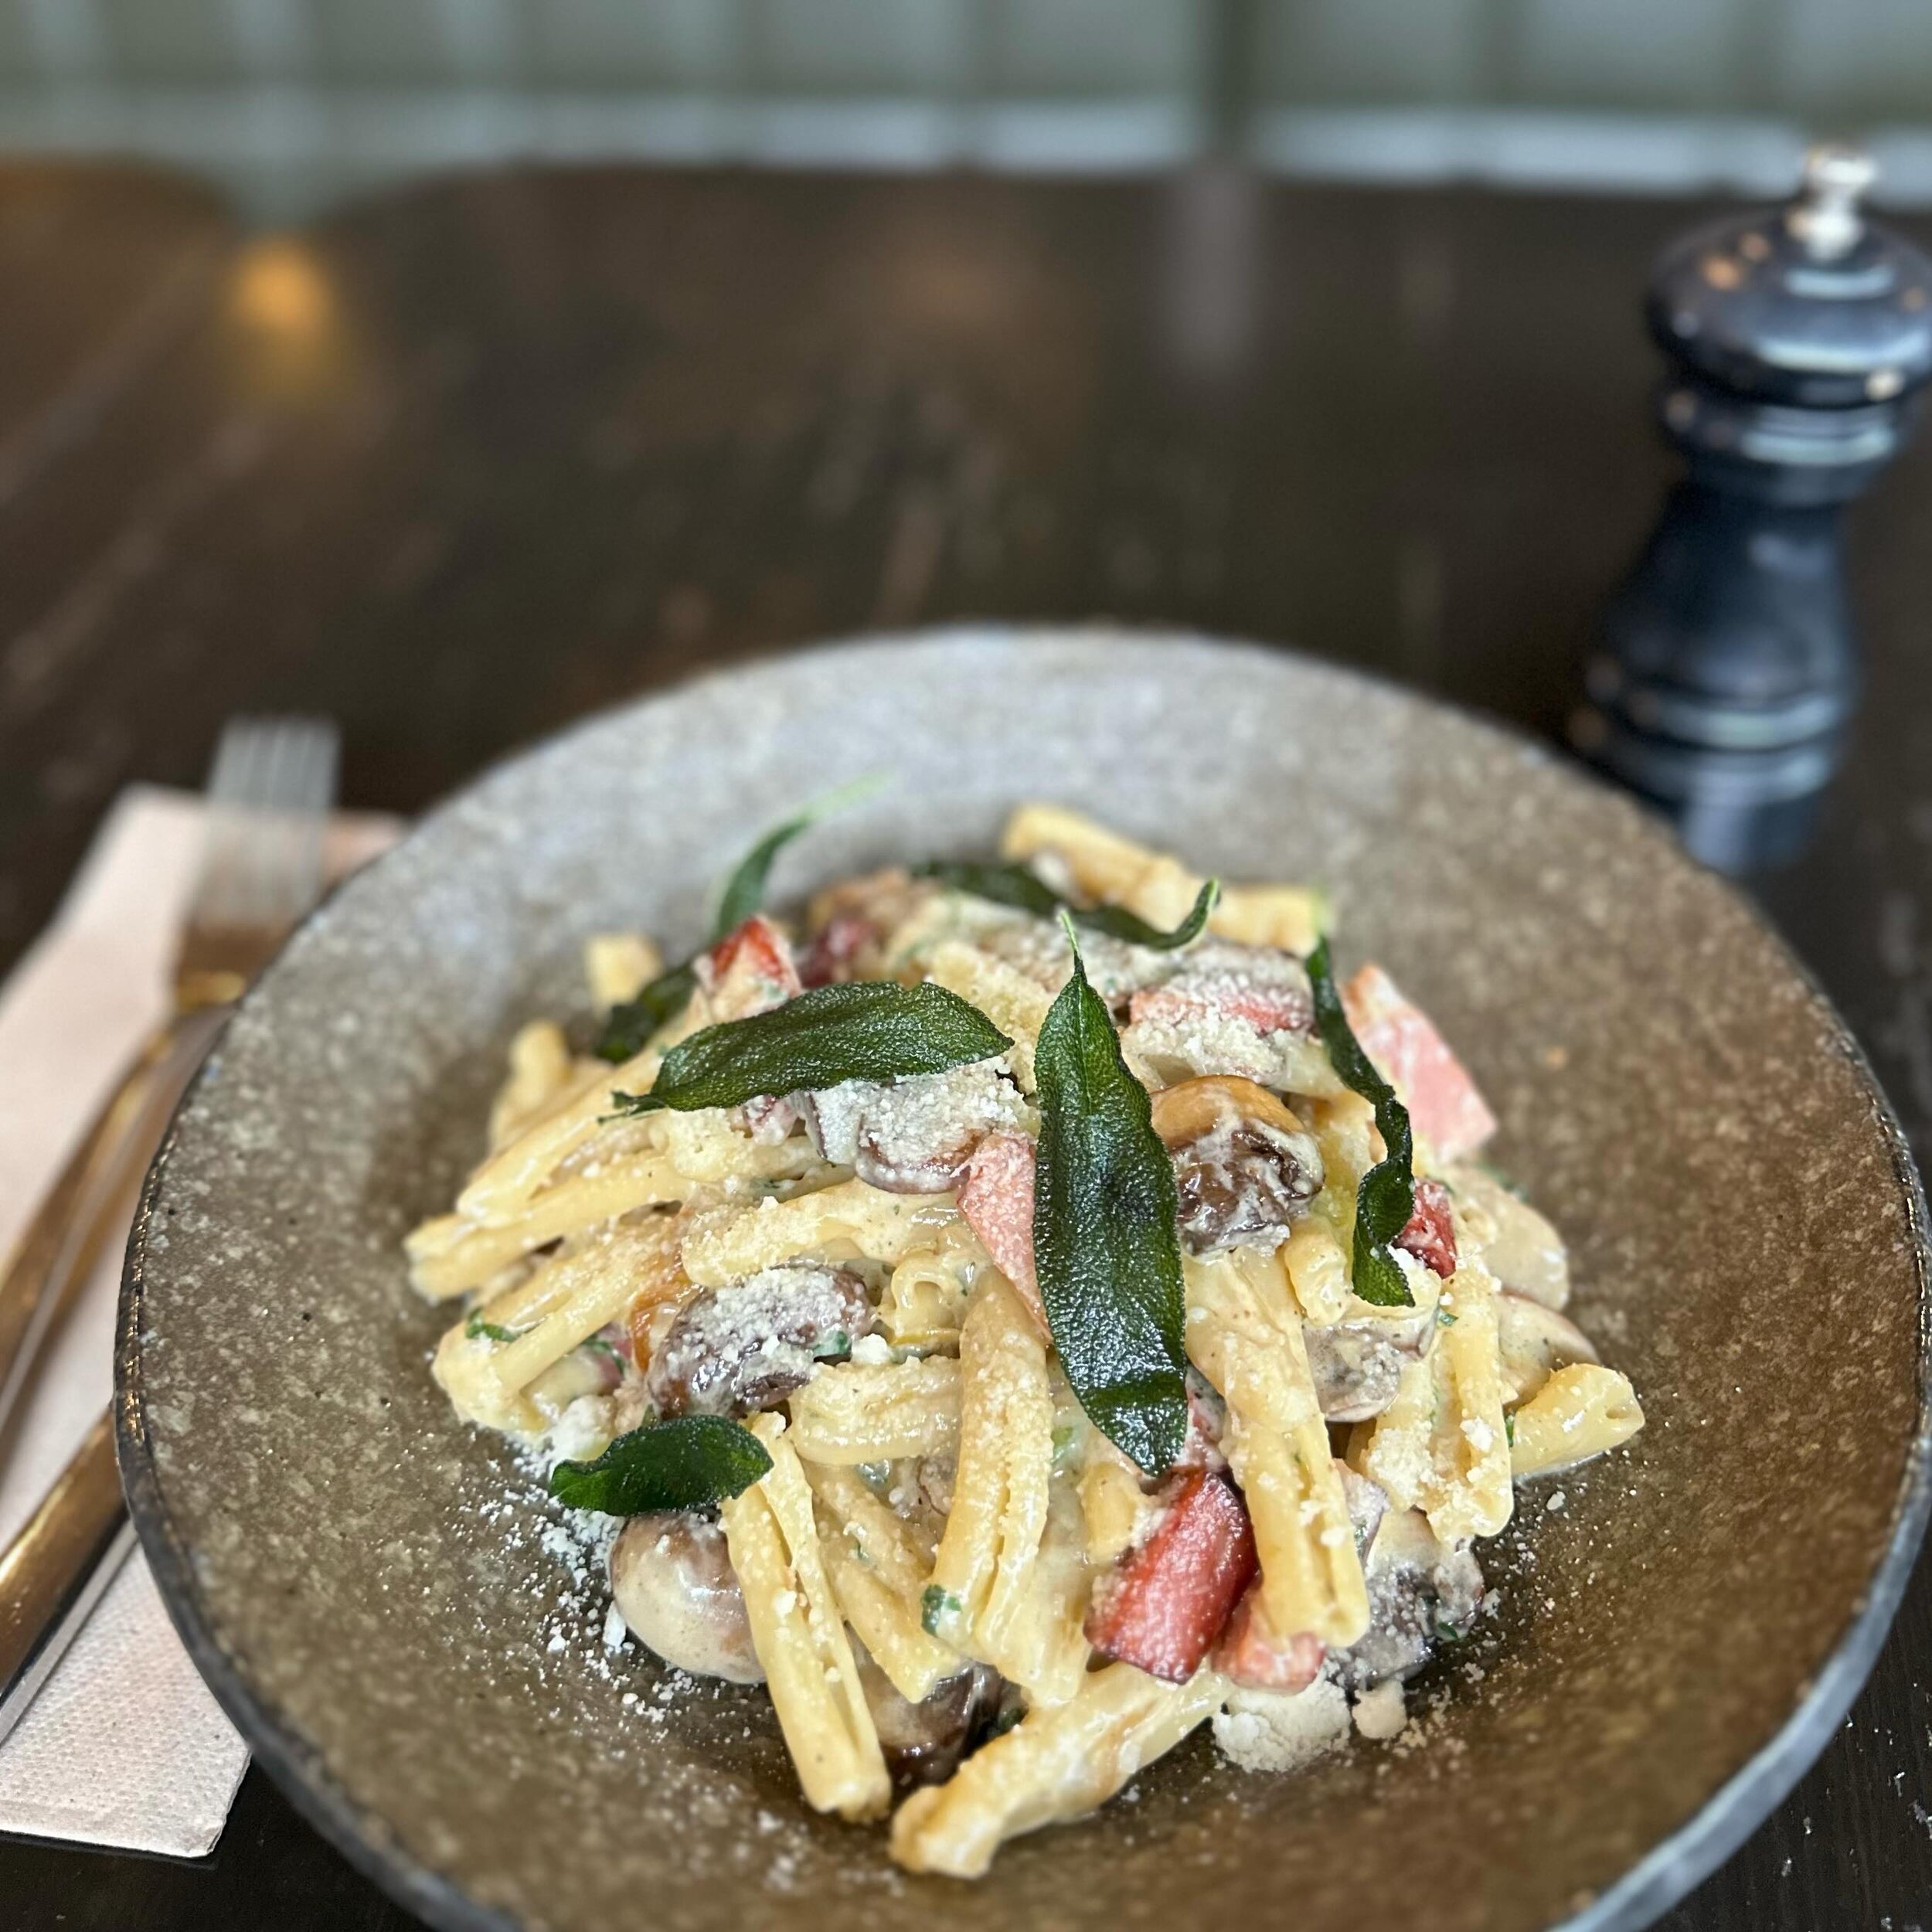 Tonight&rsquo;s $16 pasta special is delicious!
Casarecce alla Panna: mushrooms, cream, pancetta &amp; sage. Available tonight until sold out.